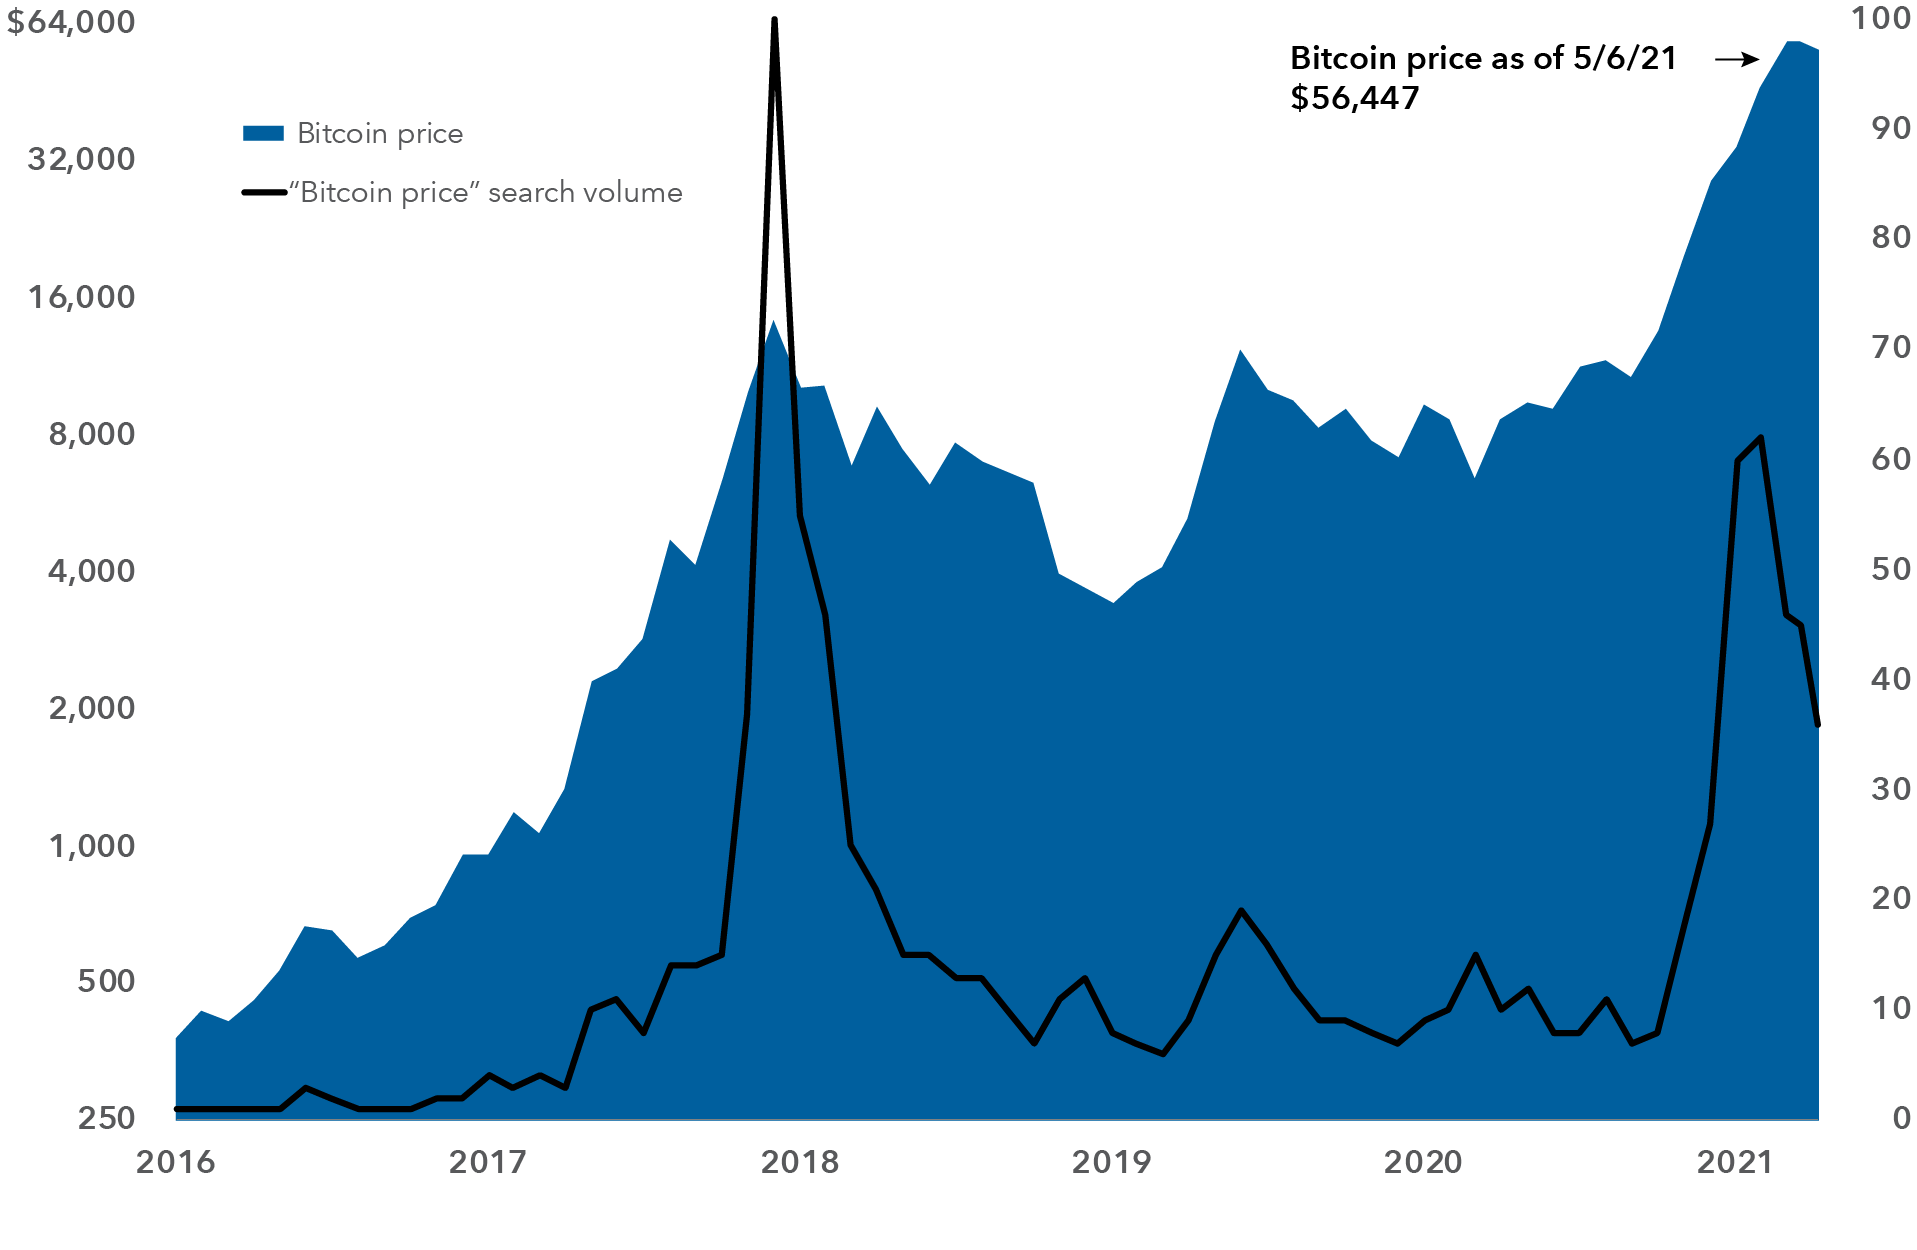 The chart shows Bitcoin’s dramatic rise in price from $378 in 2016 to over $56,000 in 2021, as well as Google searches for the term “Bitcoin price” during the same time period. Sources: Google Trends, Refinitiv Datastream. As of May 6, 2021. Search volume data represents Google search volume relative to the highest point for the given time period. A value of 100 is the peak popularity for the term. A value of 50 means that the term is half as popular as the peak. Bitcoin prices are shown on a logarithmic scale and expressed in U.S. dollars. Bitcoin price as of May 6, 2021, was $56,447.